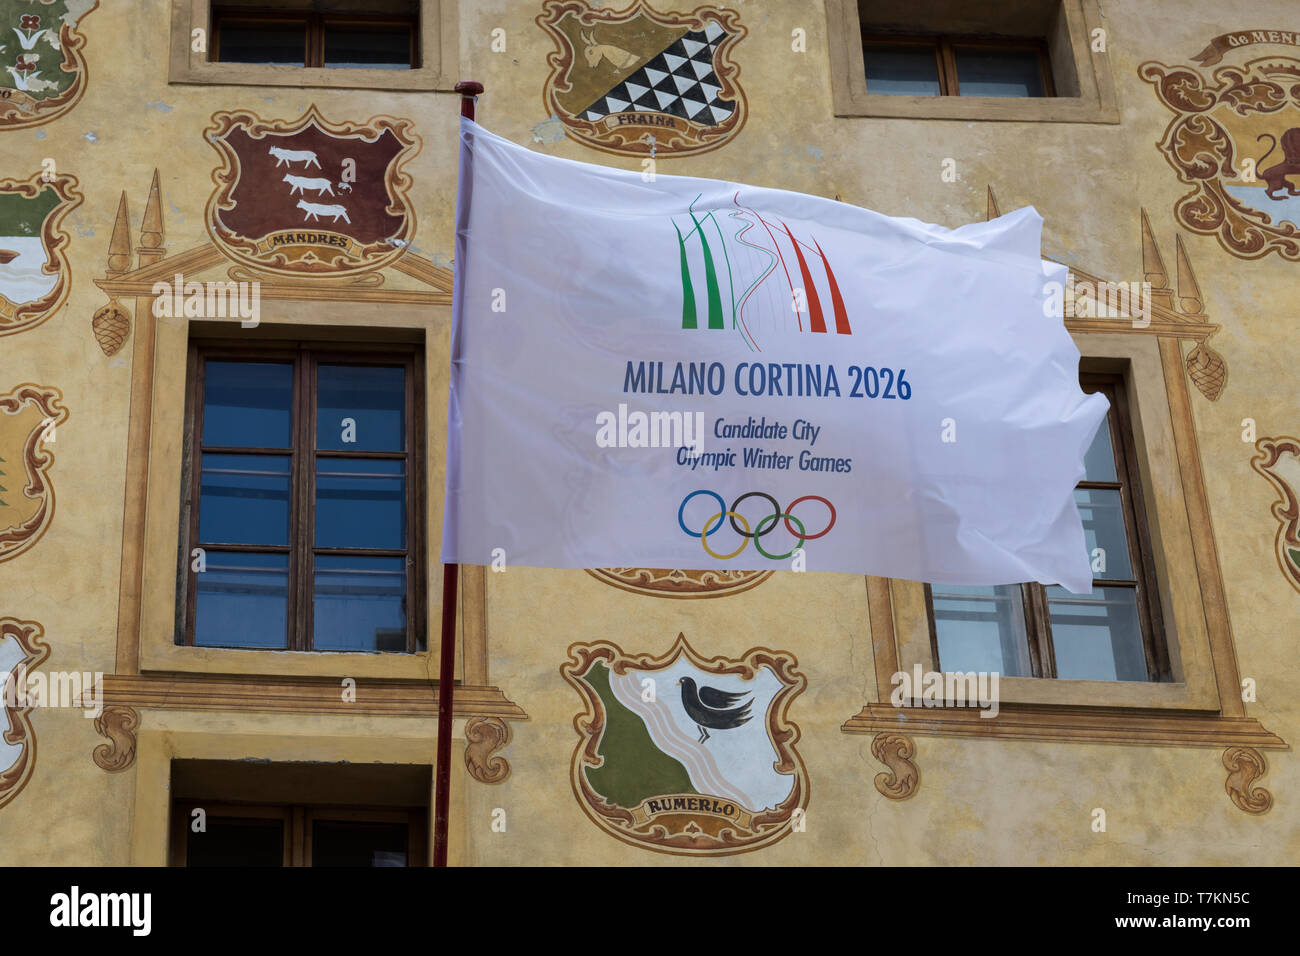 Flag of Milano Cortina candidate city for Olympic Winter Games 2026 on a historic building in Cortina D’Ampezzo, Italy Stock Photo